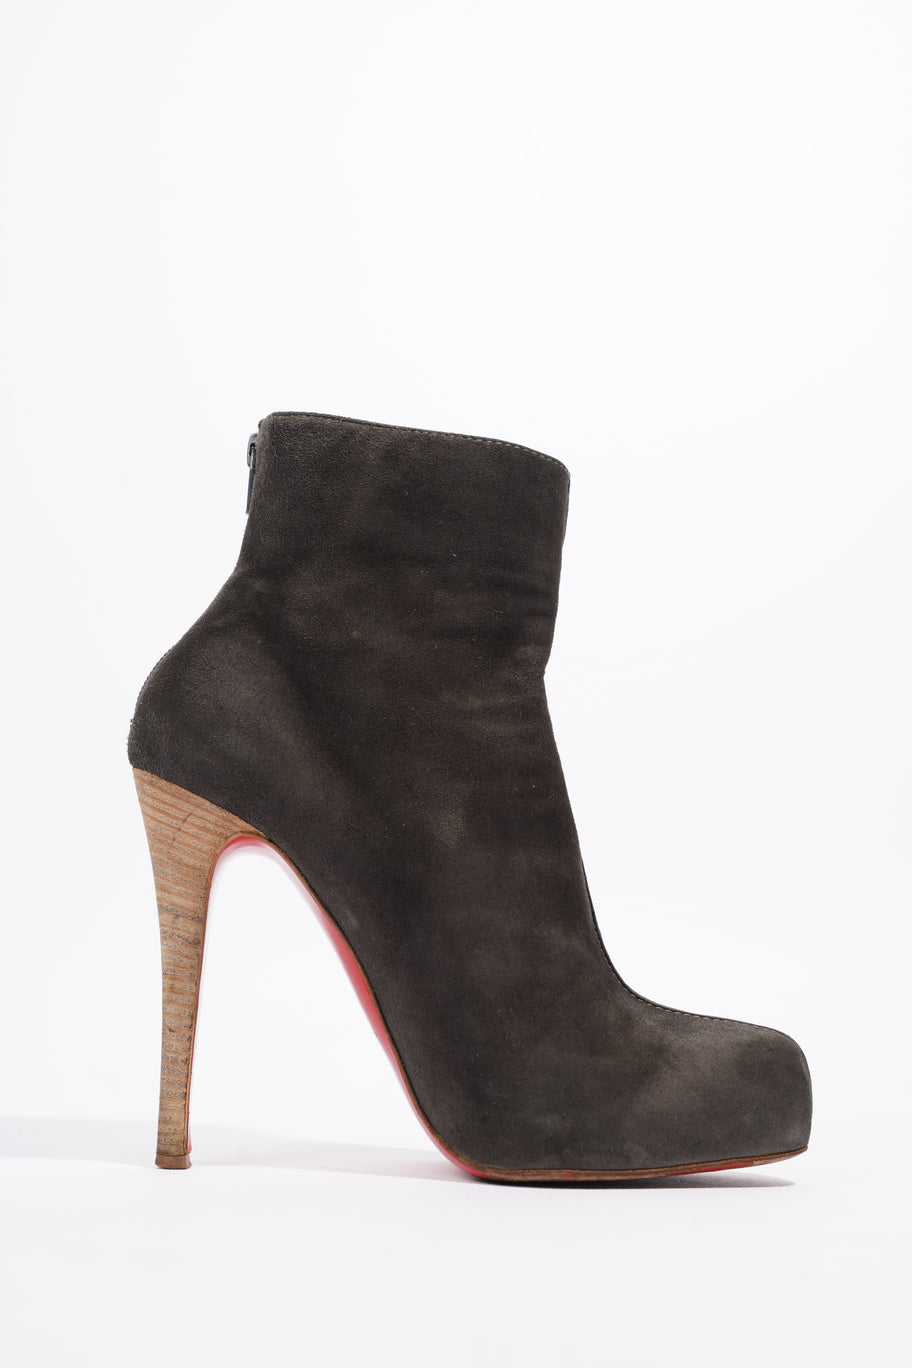 Ankle Boot Grey Suede EU 38 UK 5 Image 4